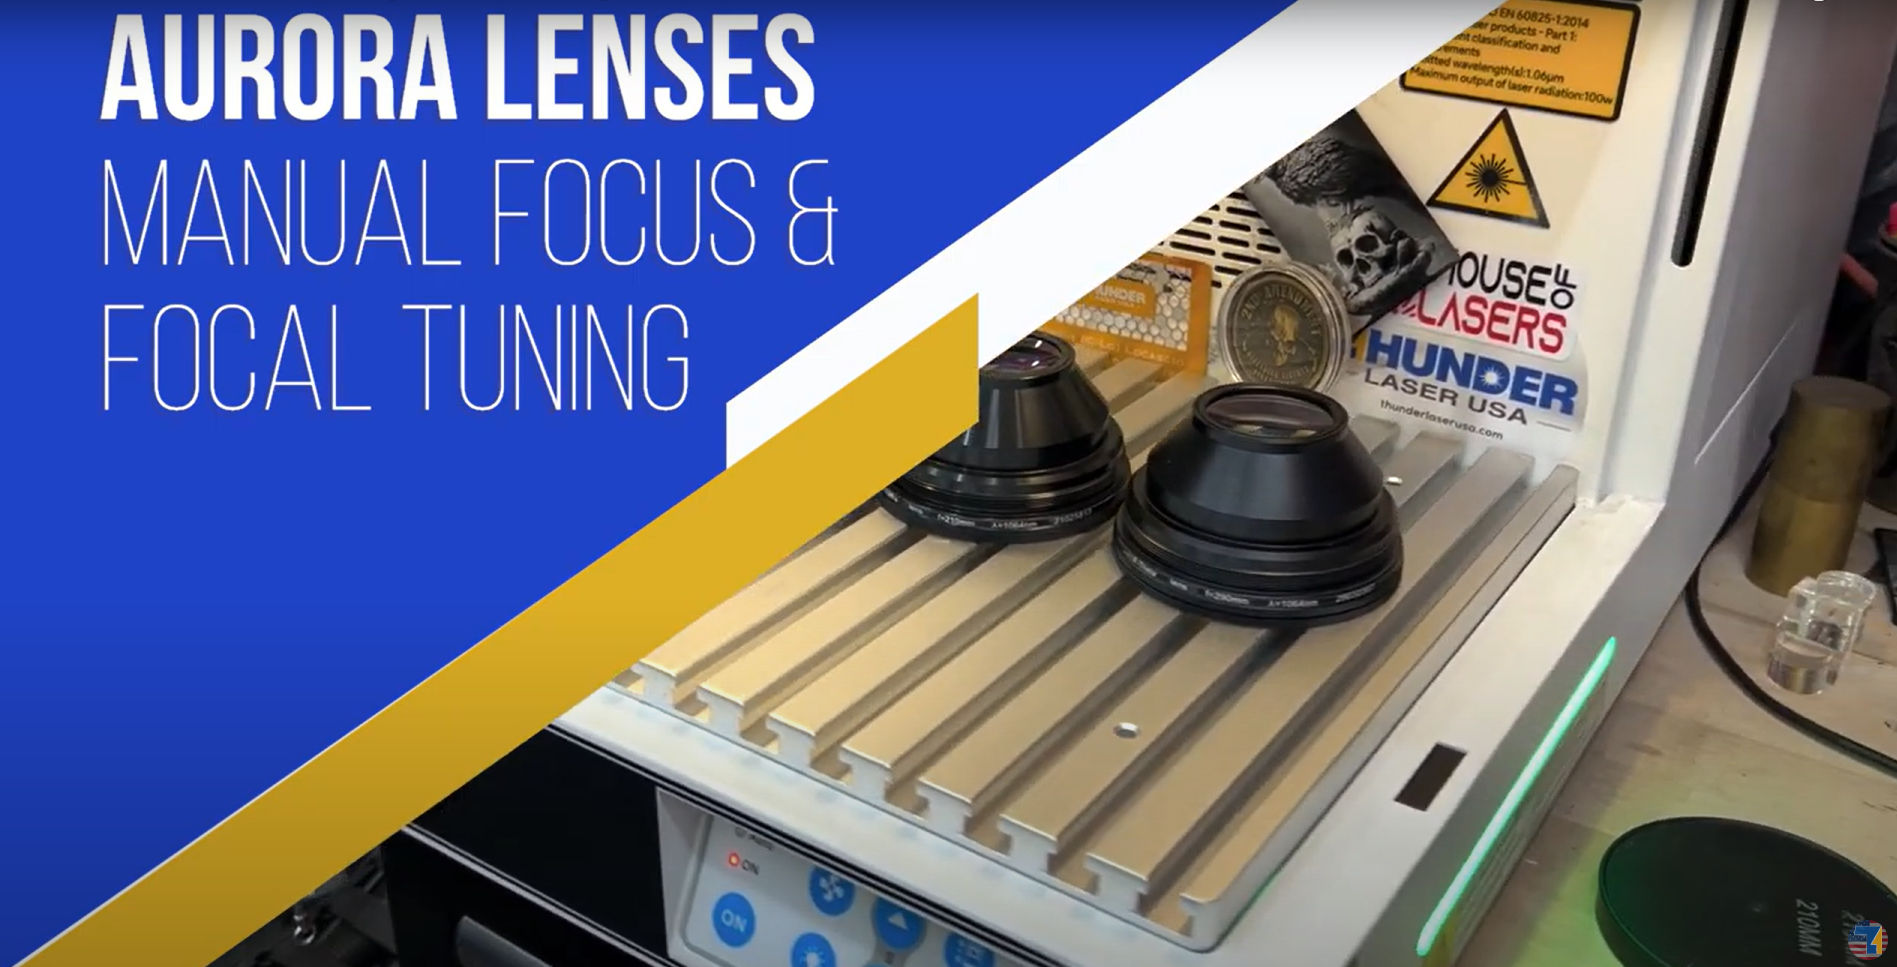 Manual Focus and Focal Tuning